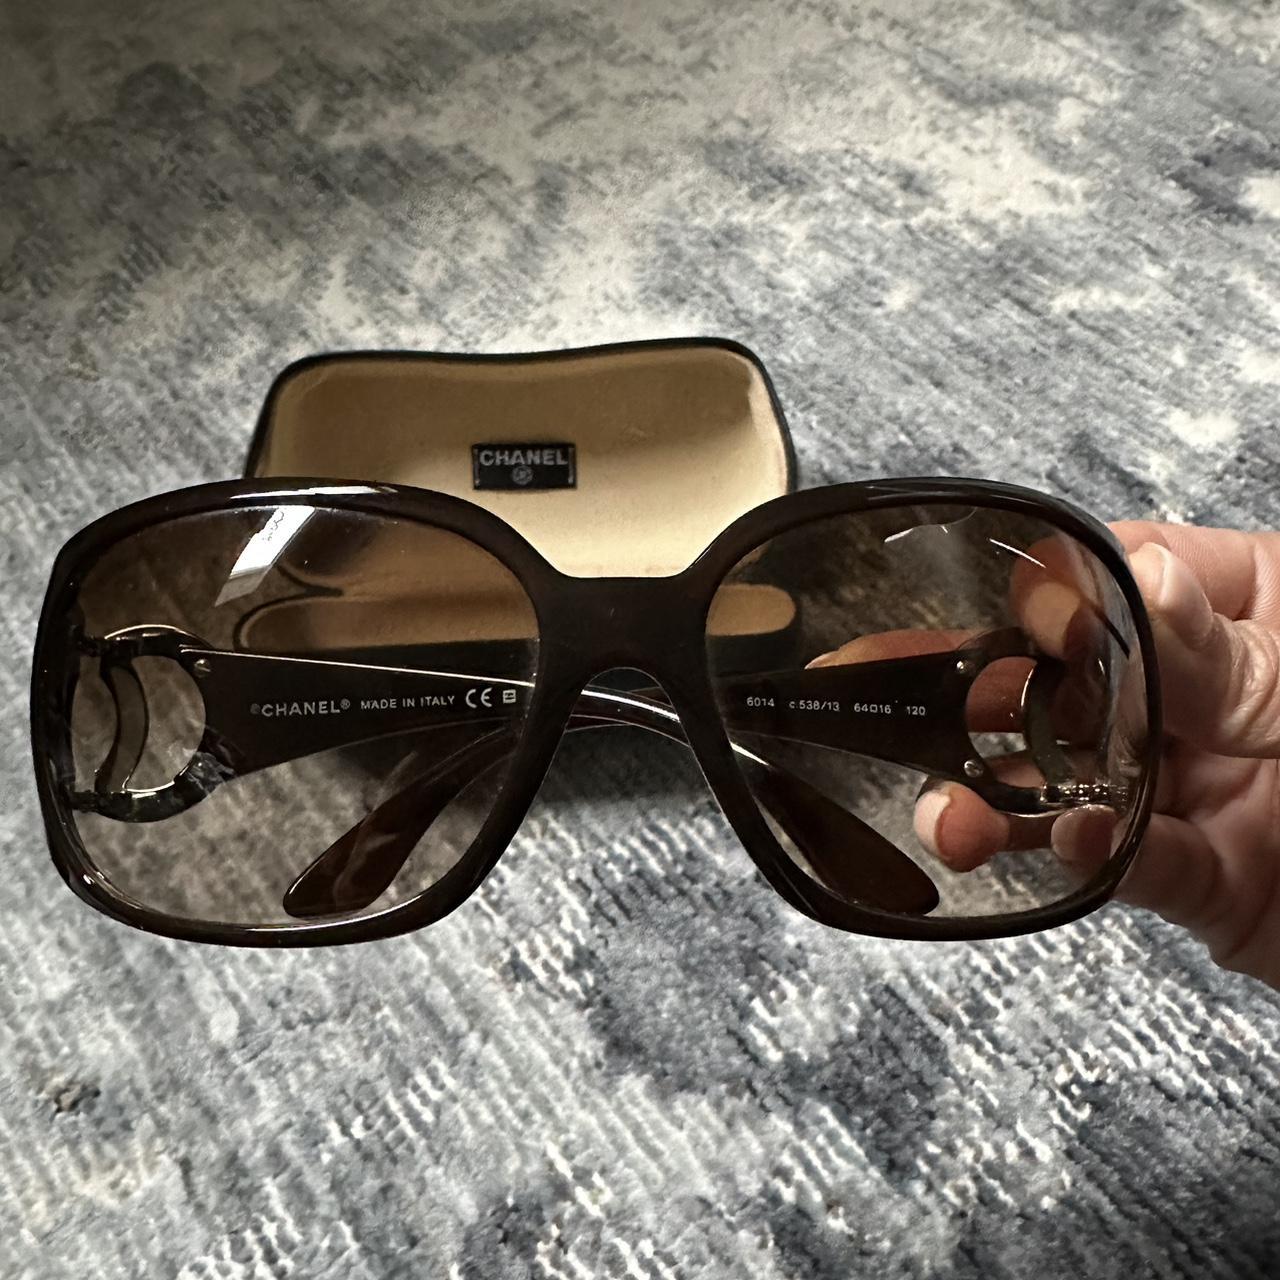 Oversized dark brown Chanel sunnies, bought in